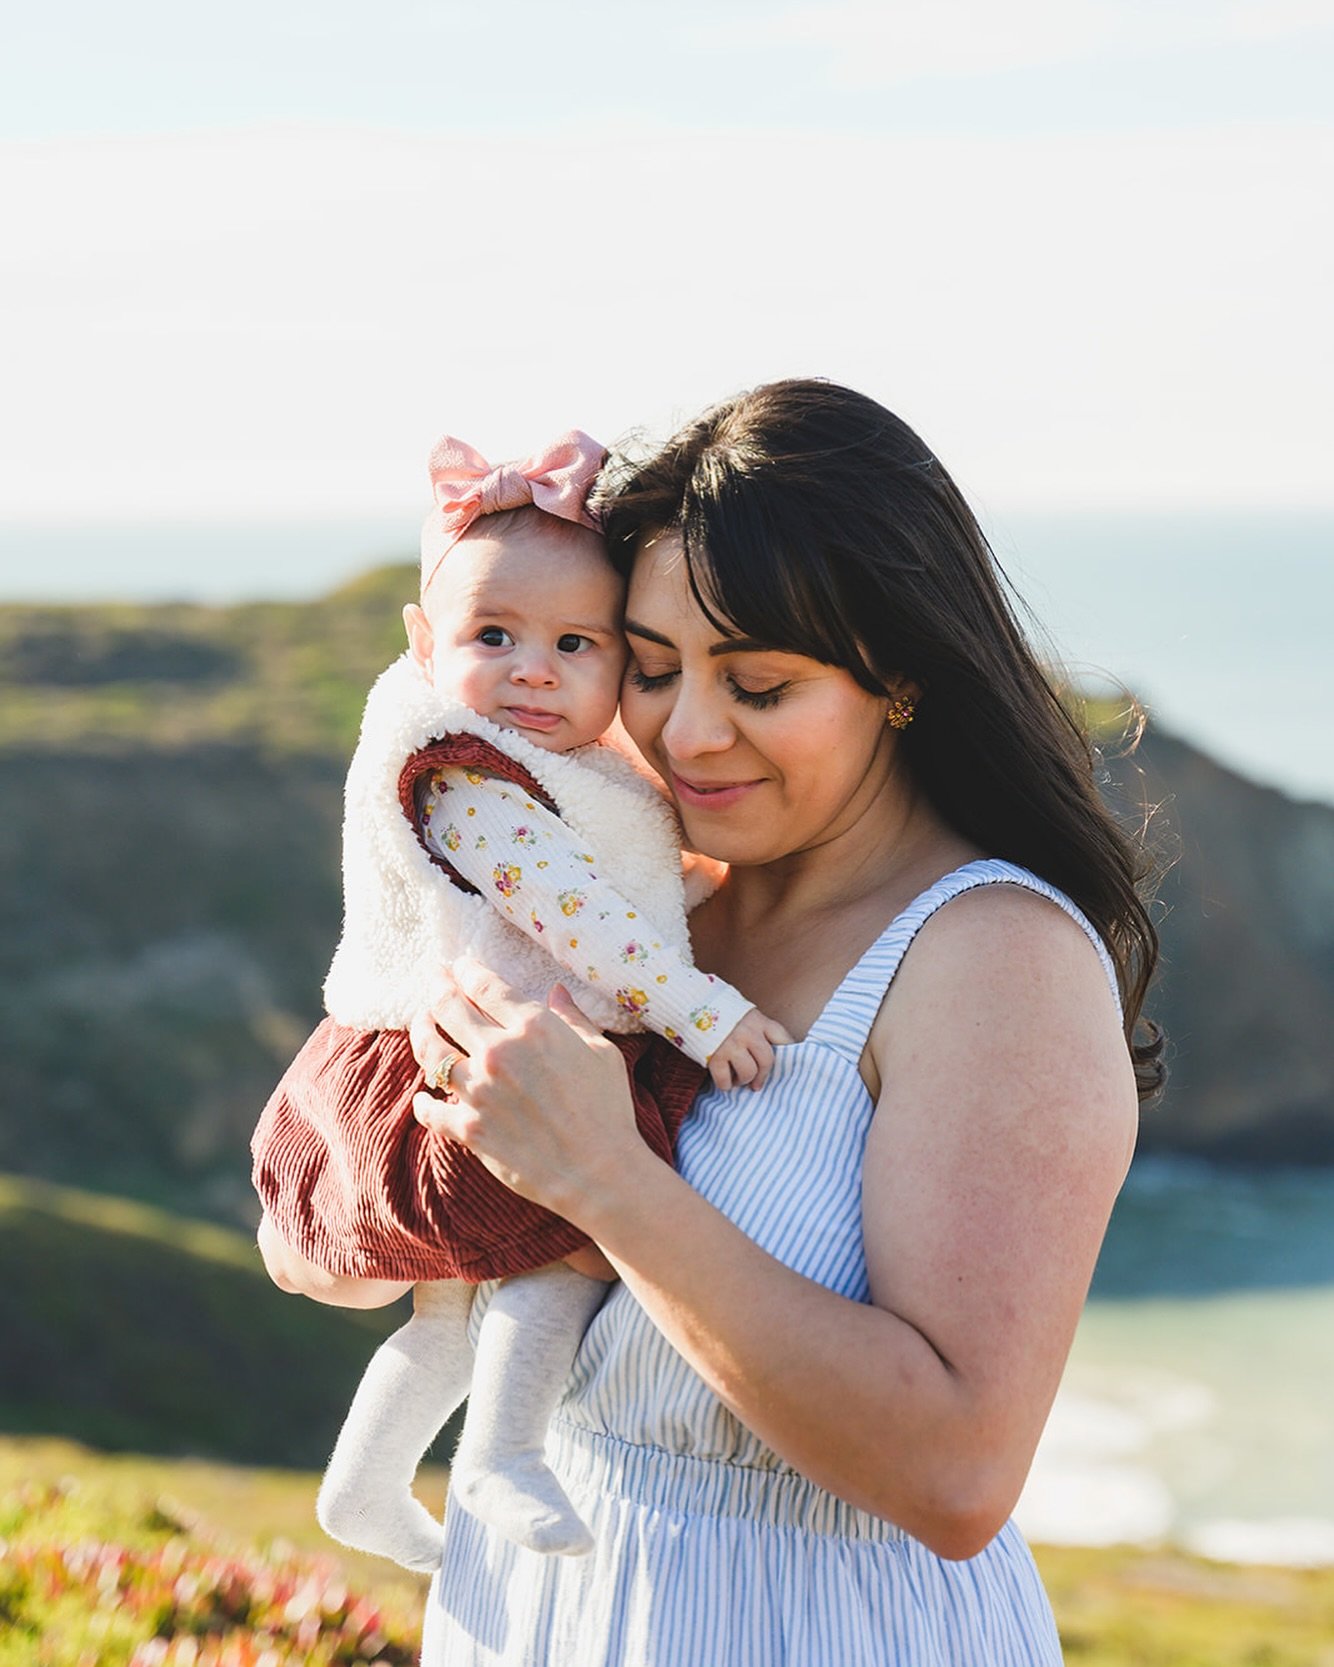 The tenderness of a mother&rsquo;s love 💕 Capture these moments with your little ones at my Mother&rsquo;s Day mini session pop-up on Saturday May 11th l. Link to sign up is in my bio! 

#mothersdaygifts #mothersdayminisessions #mothersdaygiftideas 